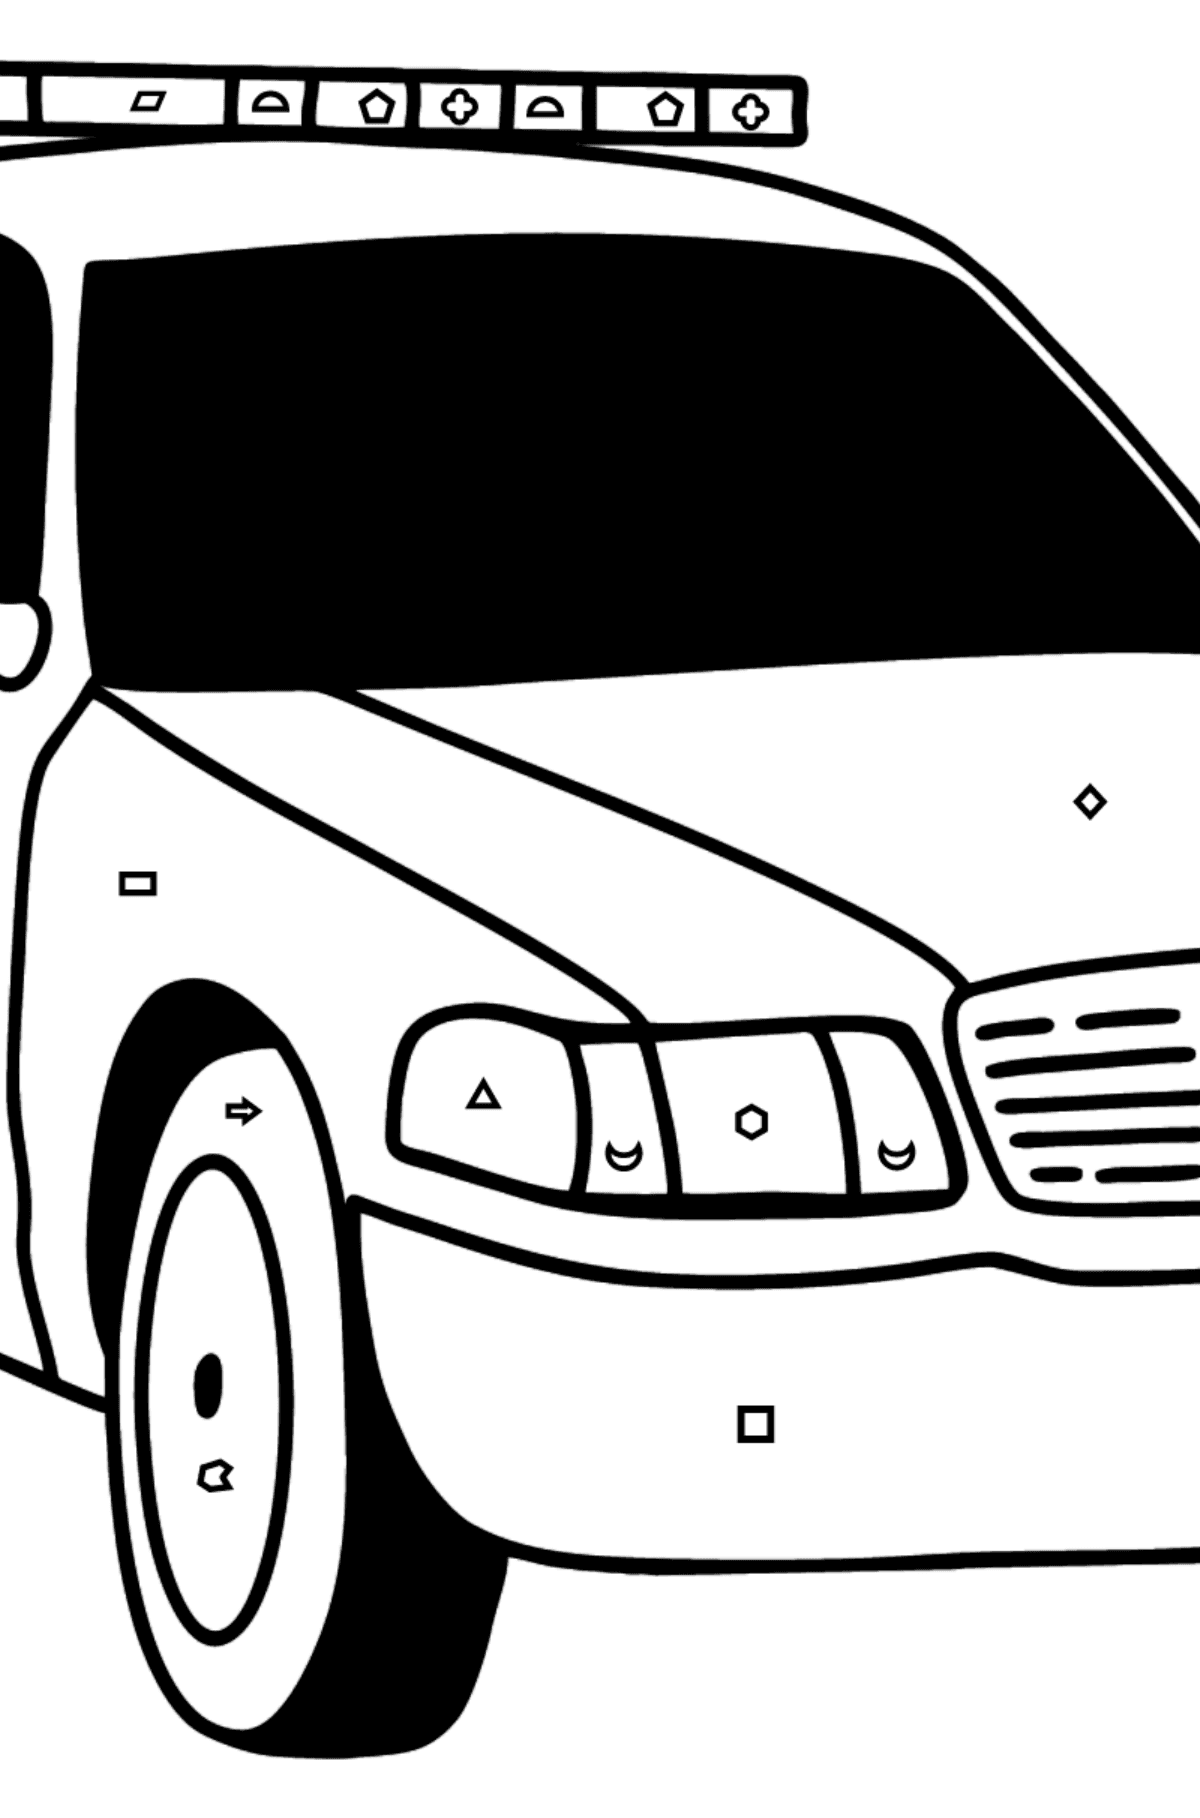 US Police Car coloring page - Coloring by Geometric Shapes for Kids